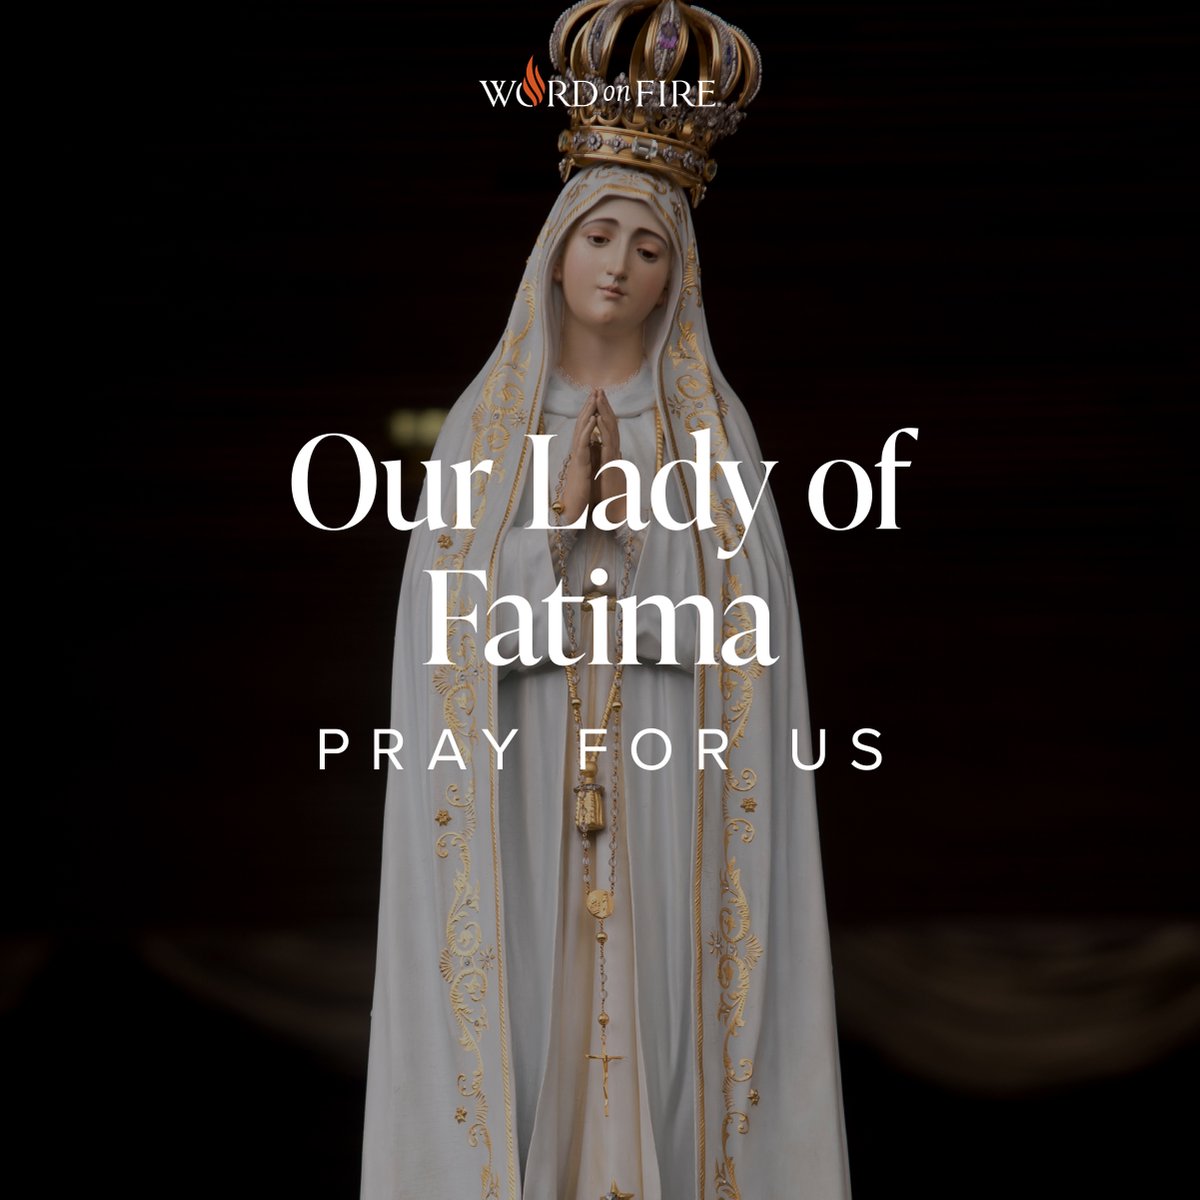 Our Lady of Fatima, pray for us!